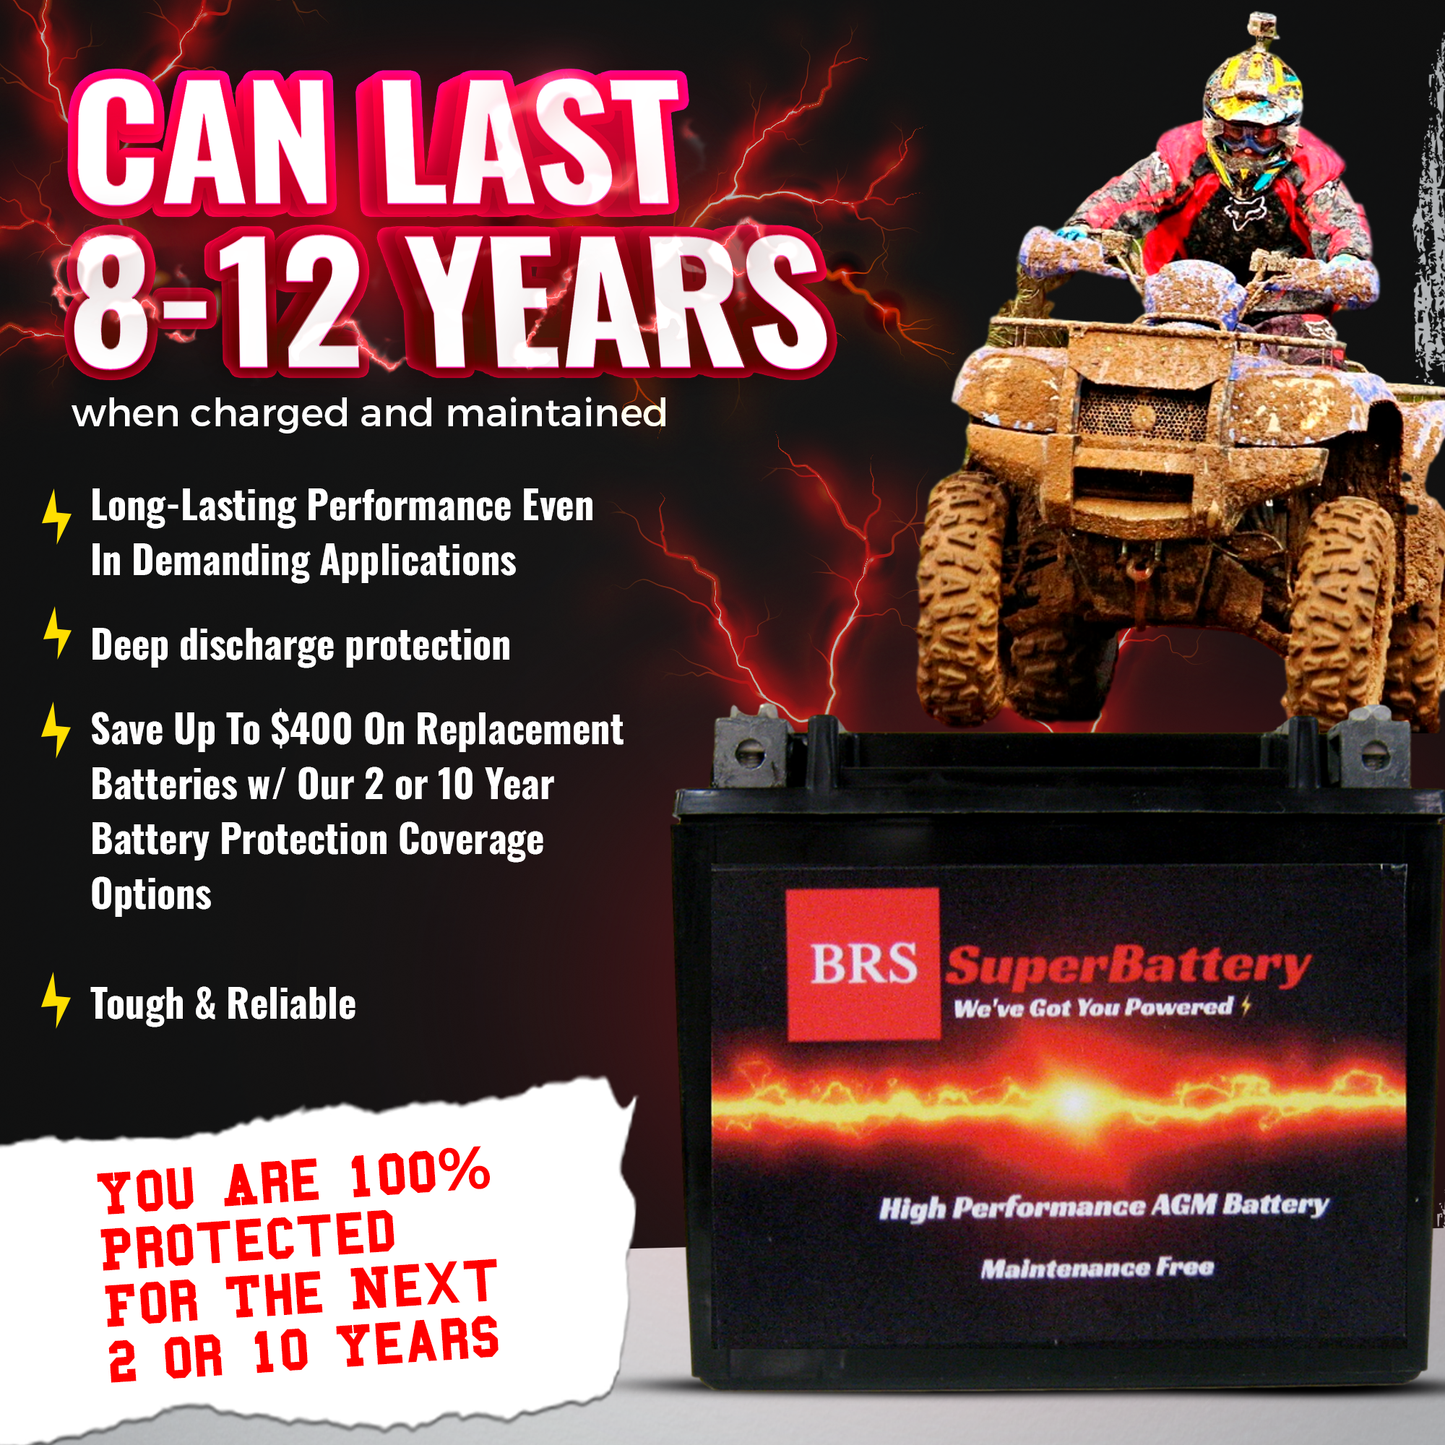 BRS5L-BS 12v High Performance Sealed AGM PowerSport 2 Year Battery - BRS Super Battery